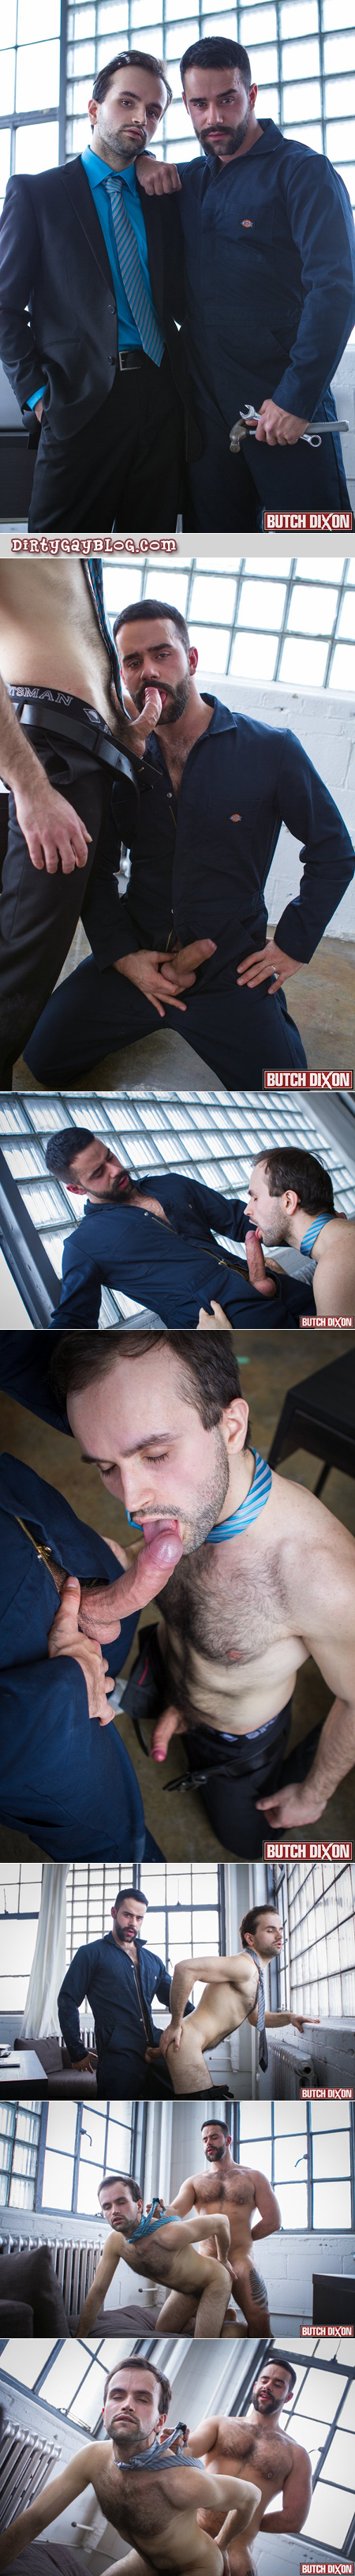 Beefy, hunky repairman fucking a male businessman in his office.